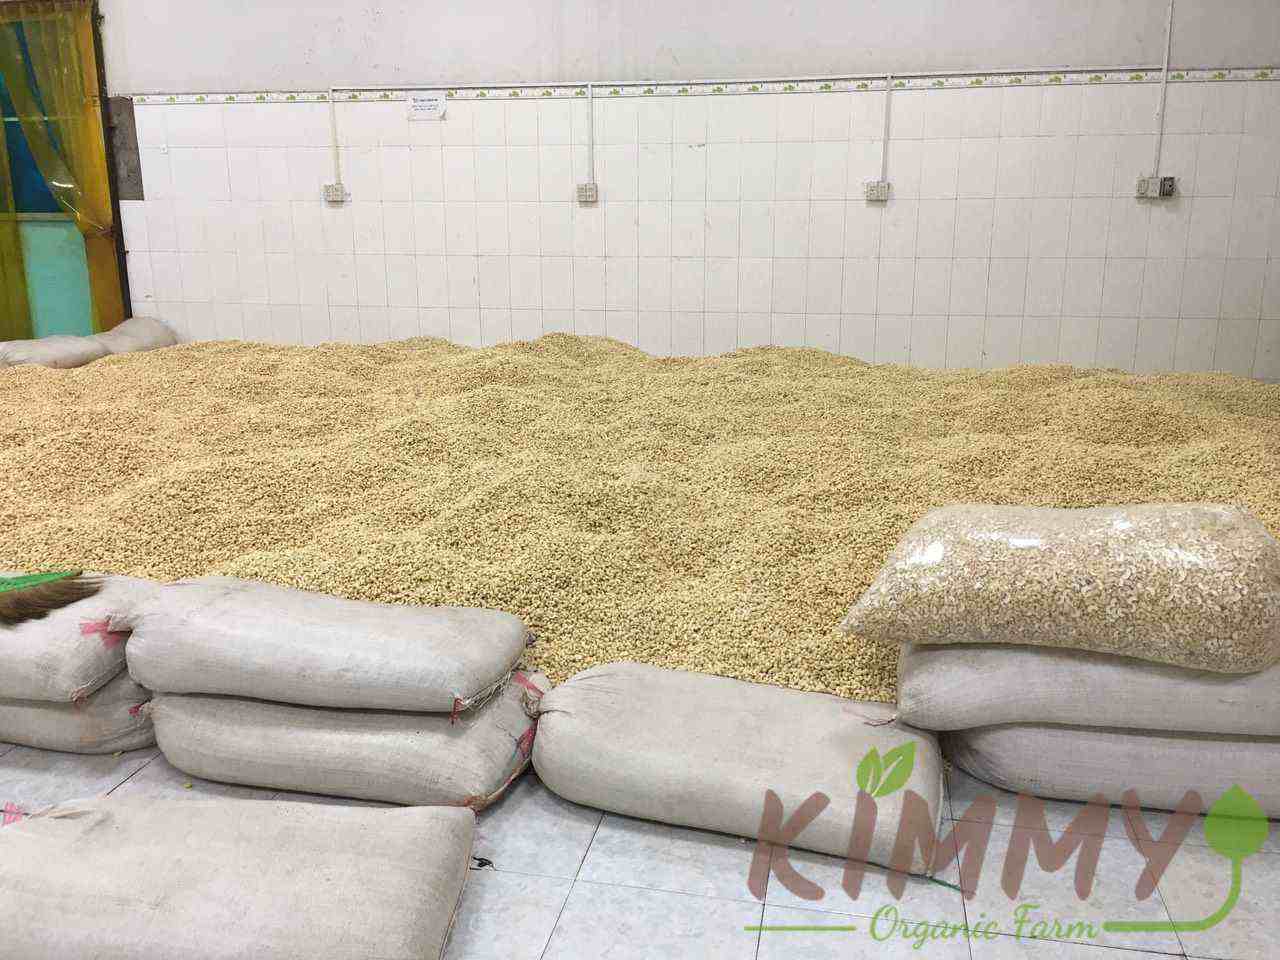 Vietnam W240 Cashew Nut White Whole Cashews High Quality Ready For Export Raw Image Of W240 From Our Cashew Factory! 2